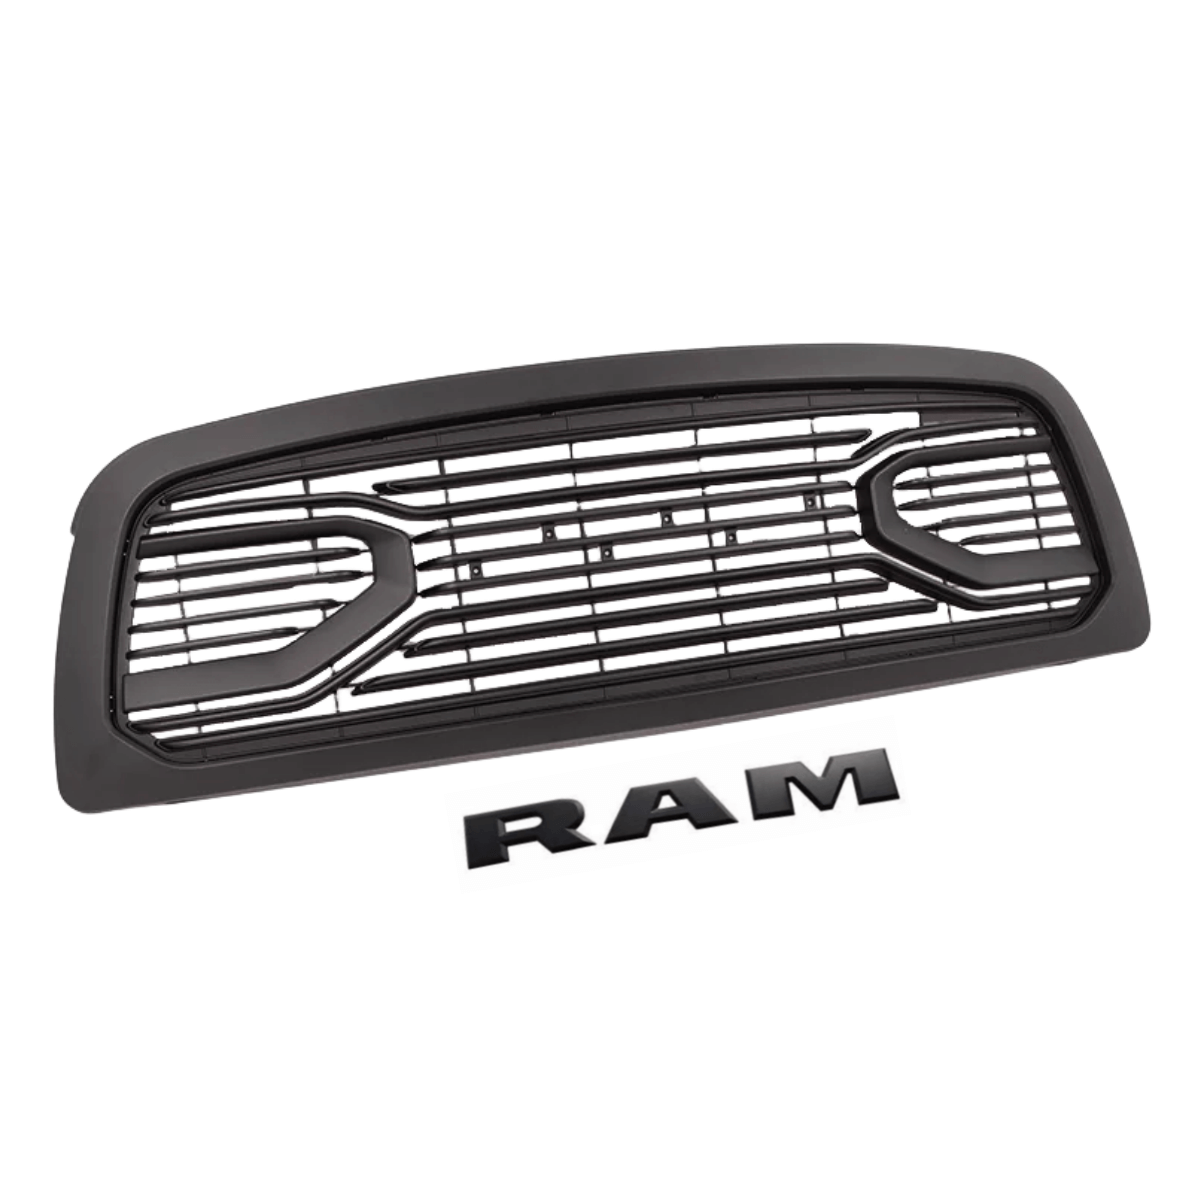 {WildWell}{Dodge Grill}-{Dodge RAM 2500 3500 Grill 2010-2019/3}-Left